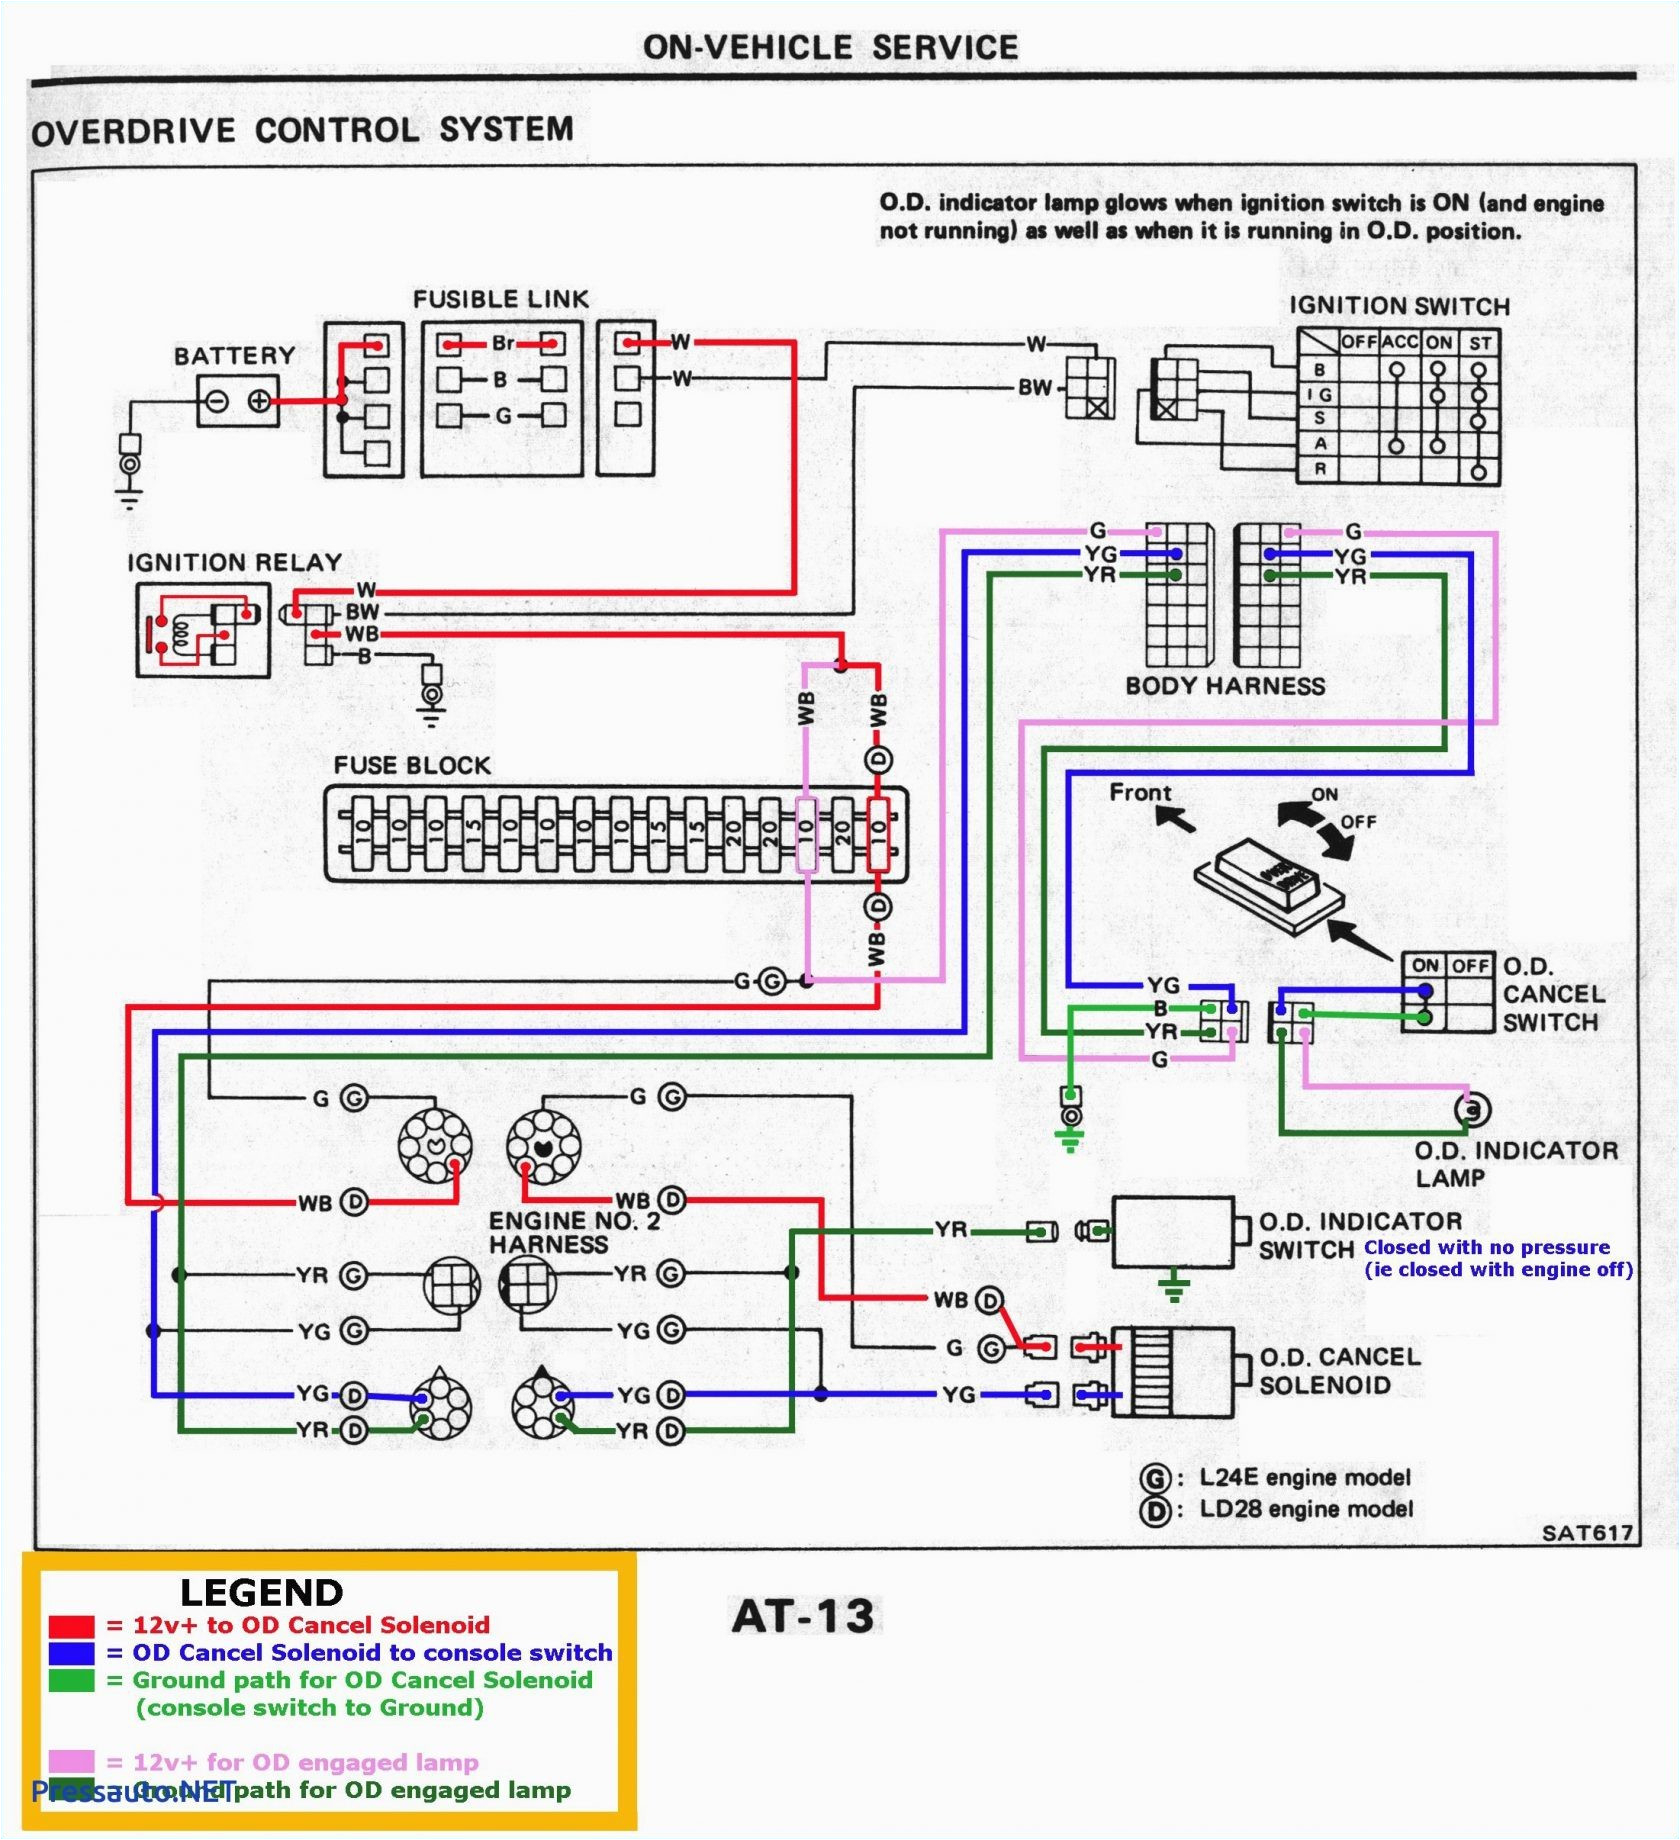 nissan ecu pinouts diagram as well 7 point wiring harness diagram wiring diagram host